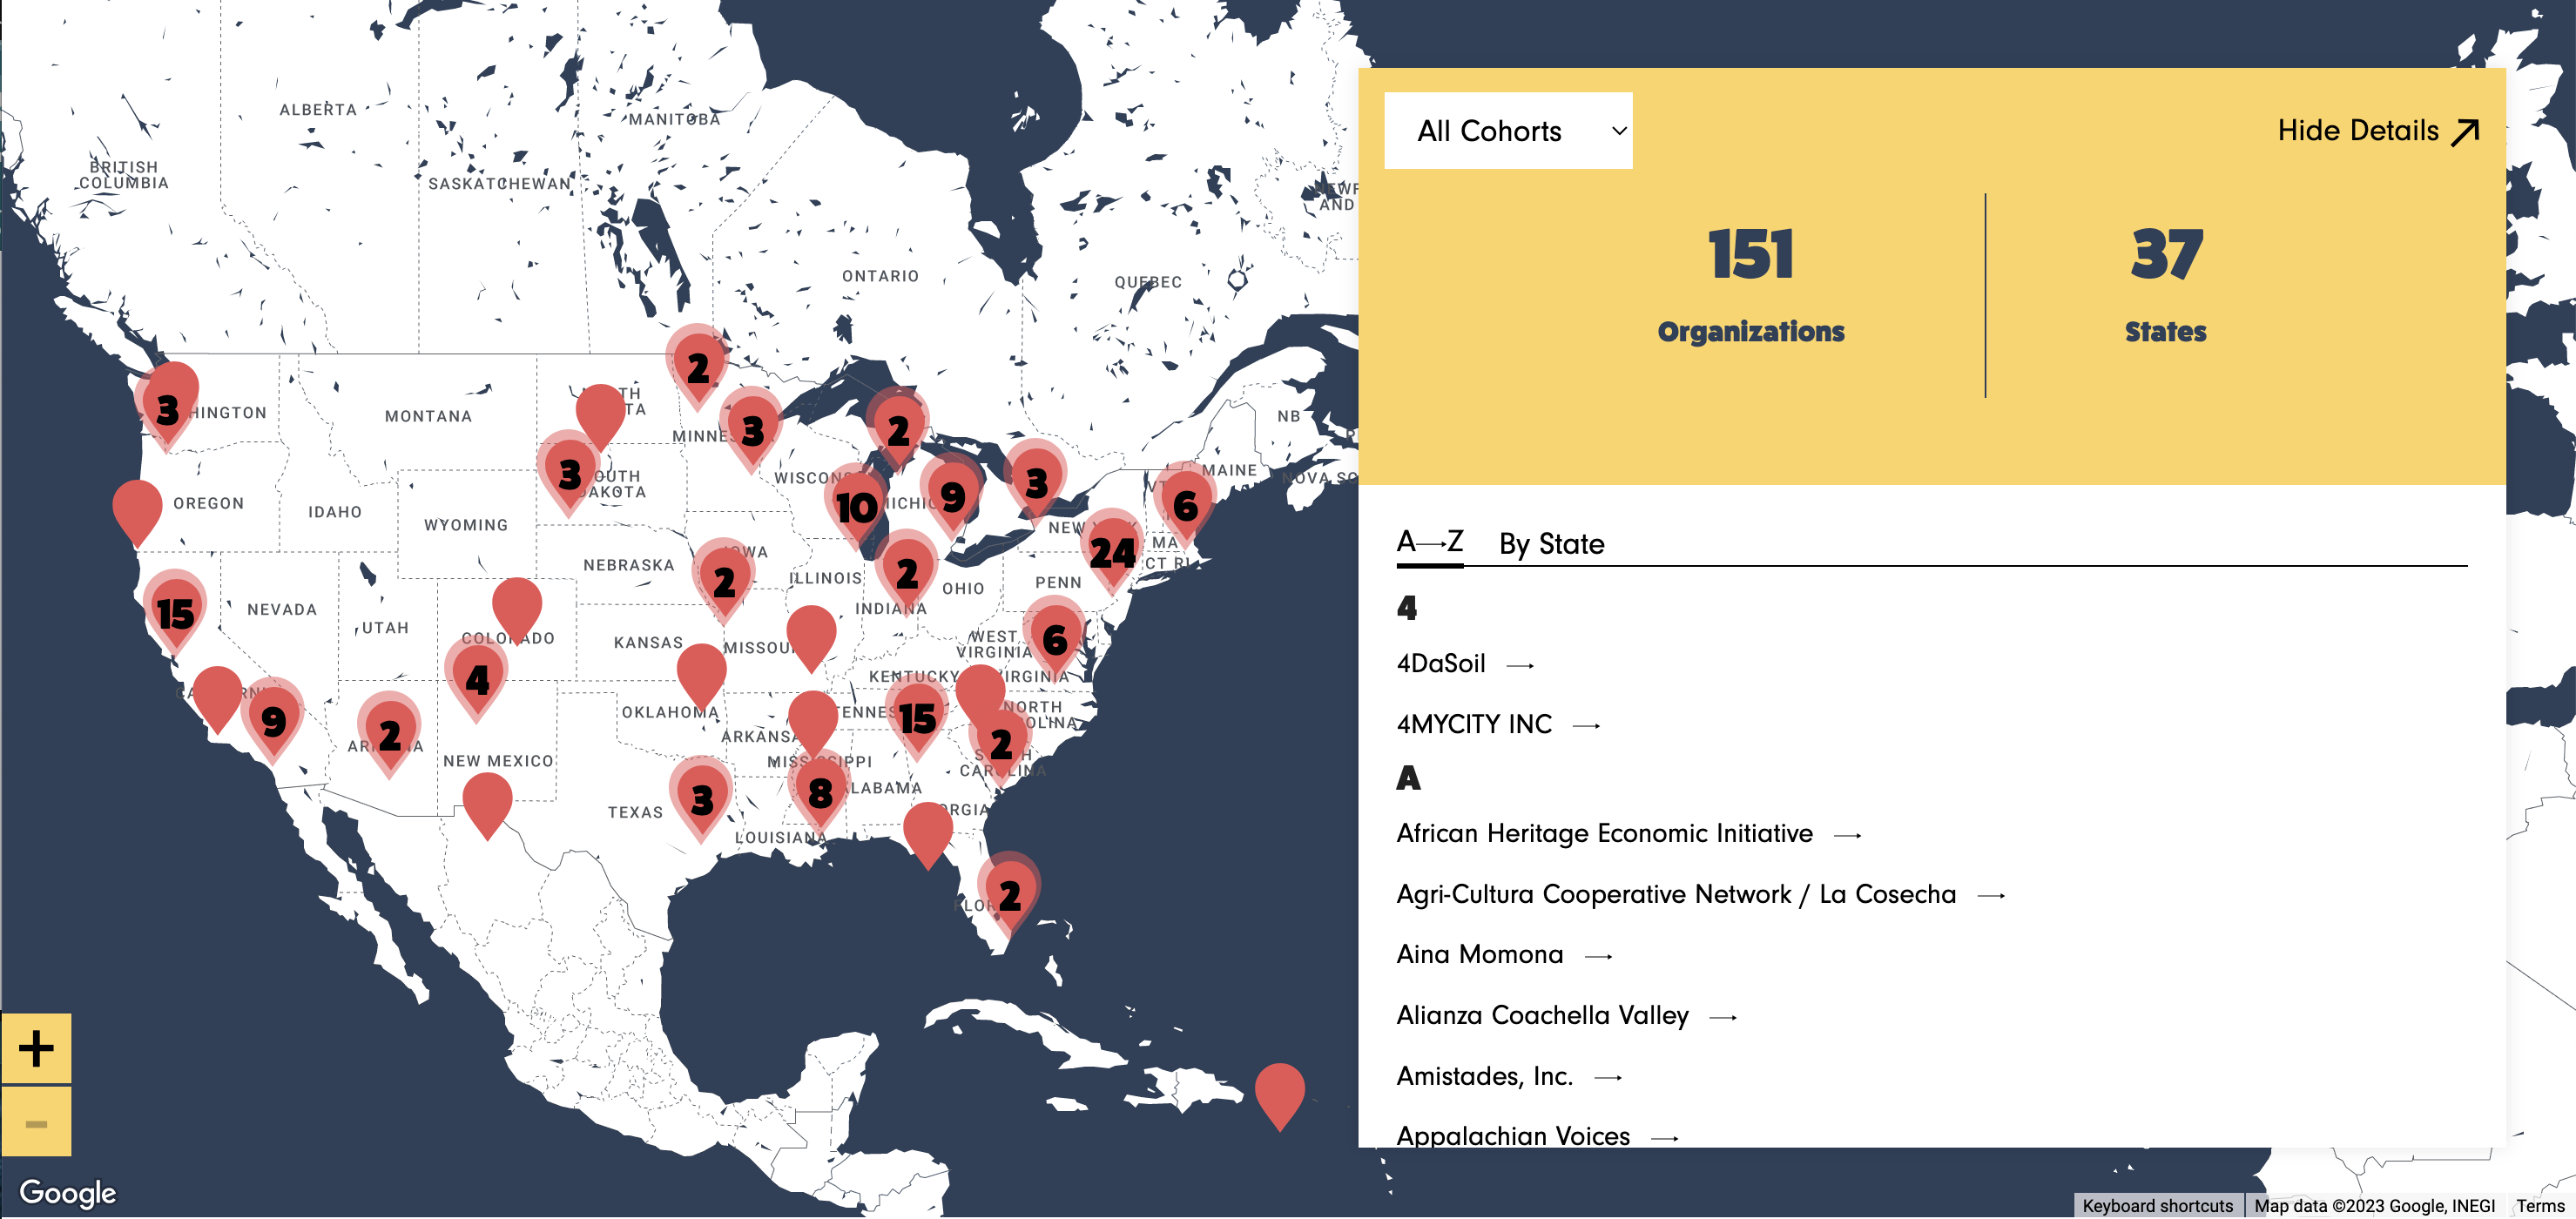 Map of United States with many clickable pins to show location of cohort members across the country and provide access to information about each cohort member.